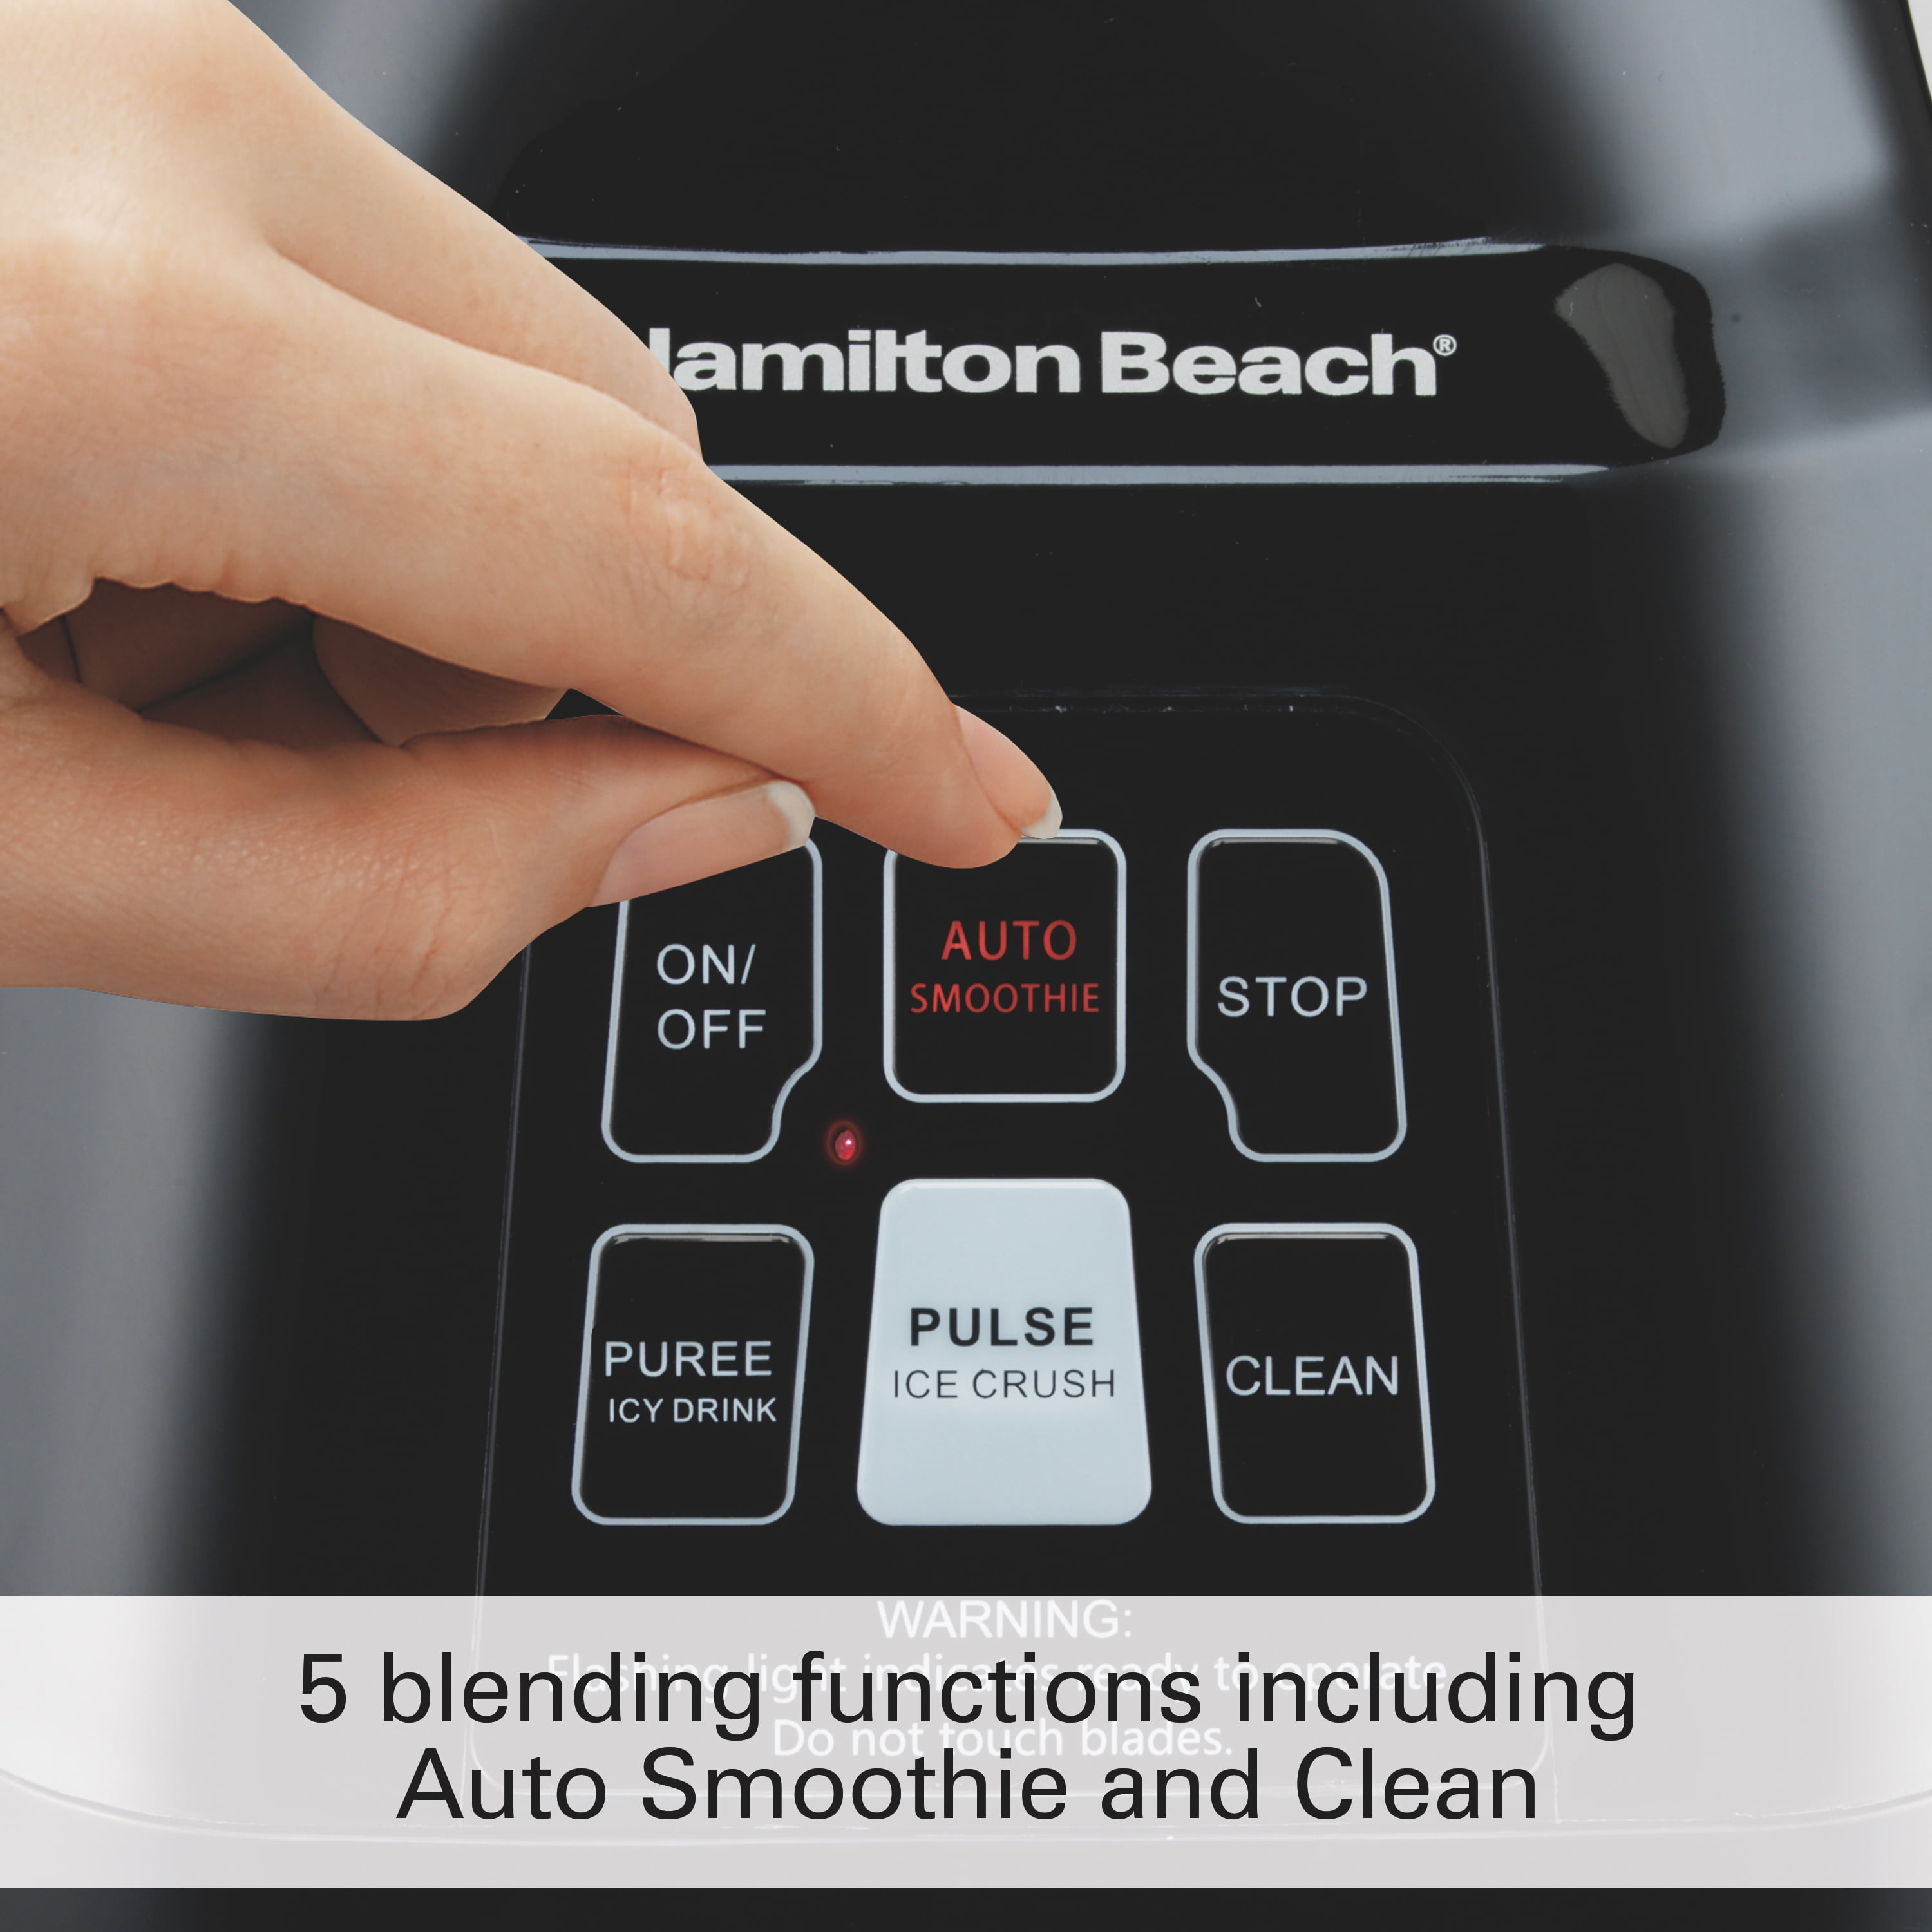 Hamilton Beach Smoothie Smart Blender with 5 Functions Including Auto-Cycle  For Shakes & Smoothies, 40oz Glass Jar Dial, Stainless Steel (56208)